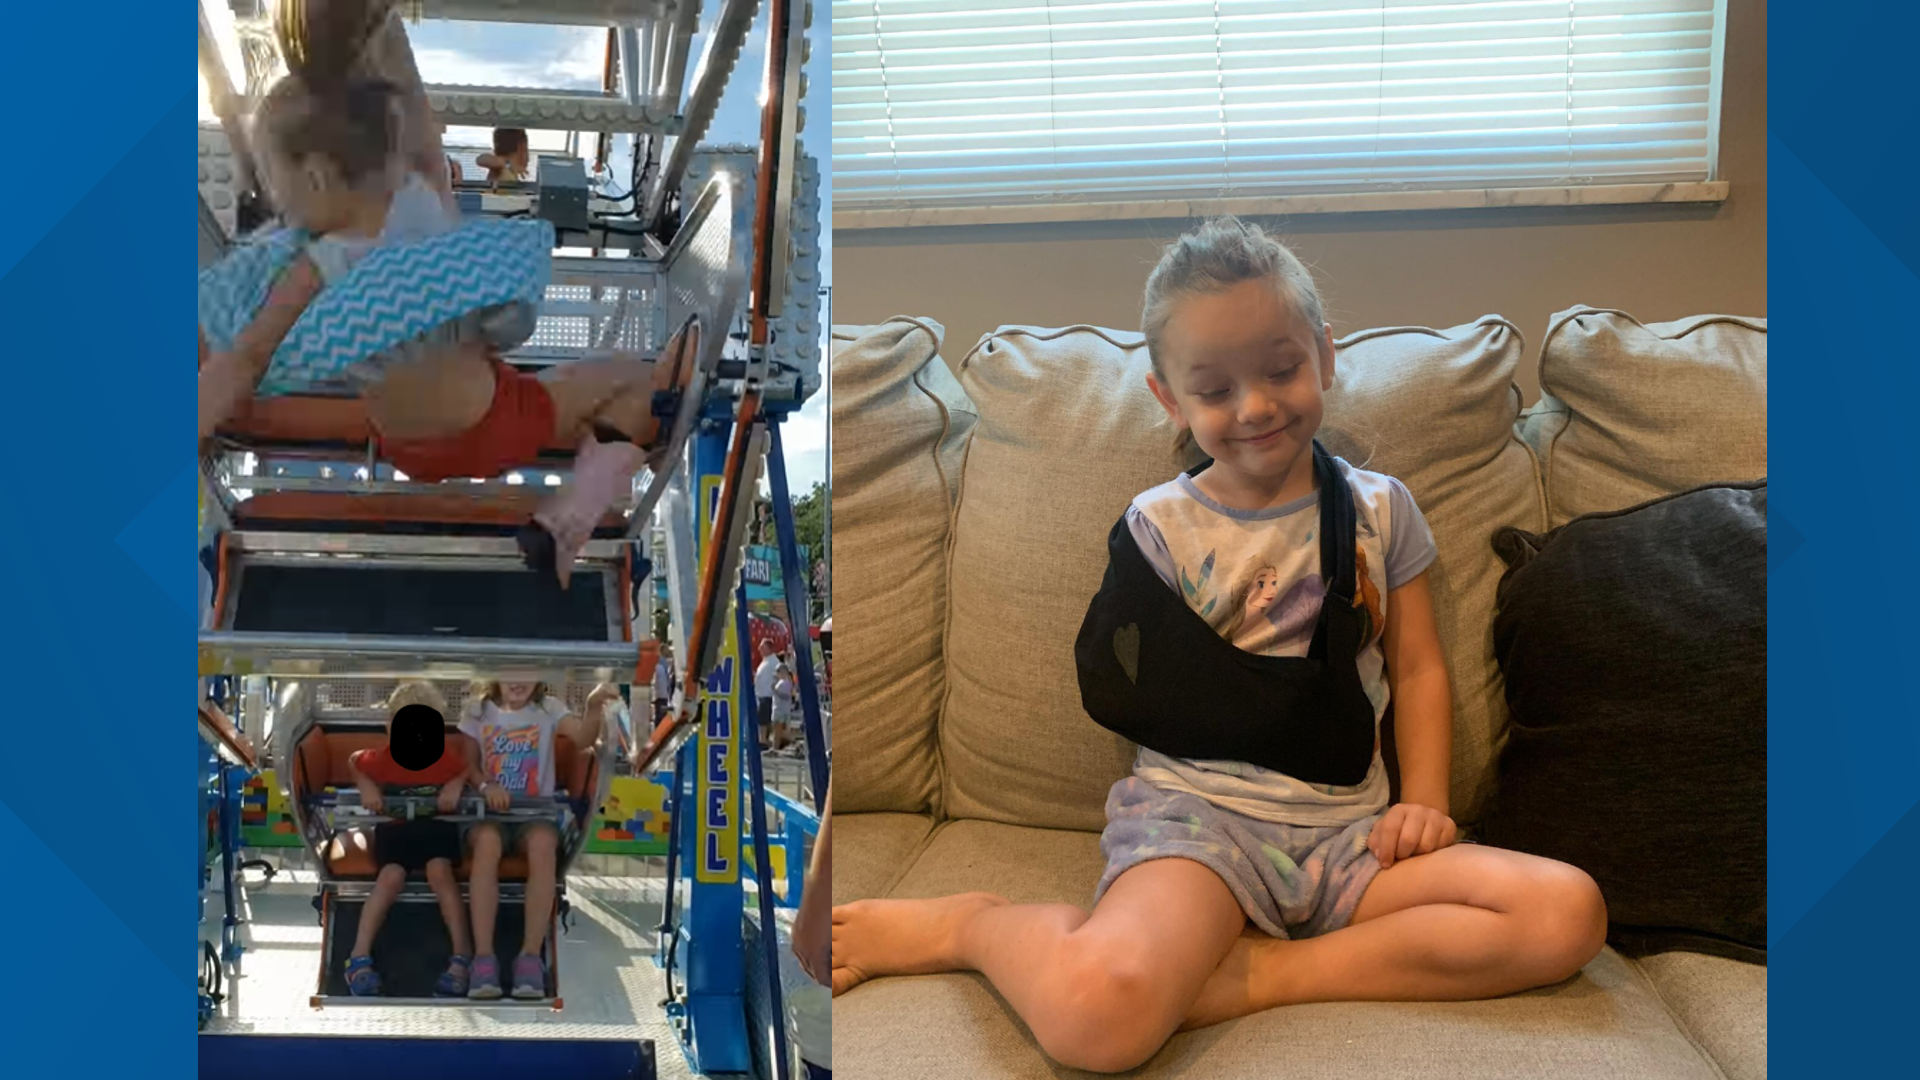 Faith Cahill, 4, suffered a broken collarbone and bruises after falling several feet from a festival ride on Sunday.